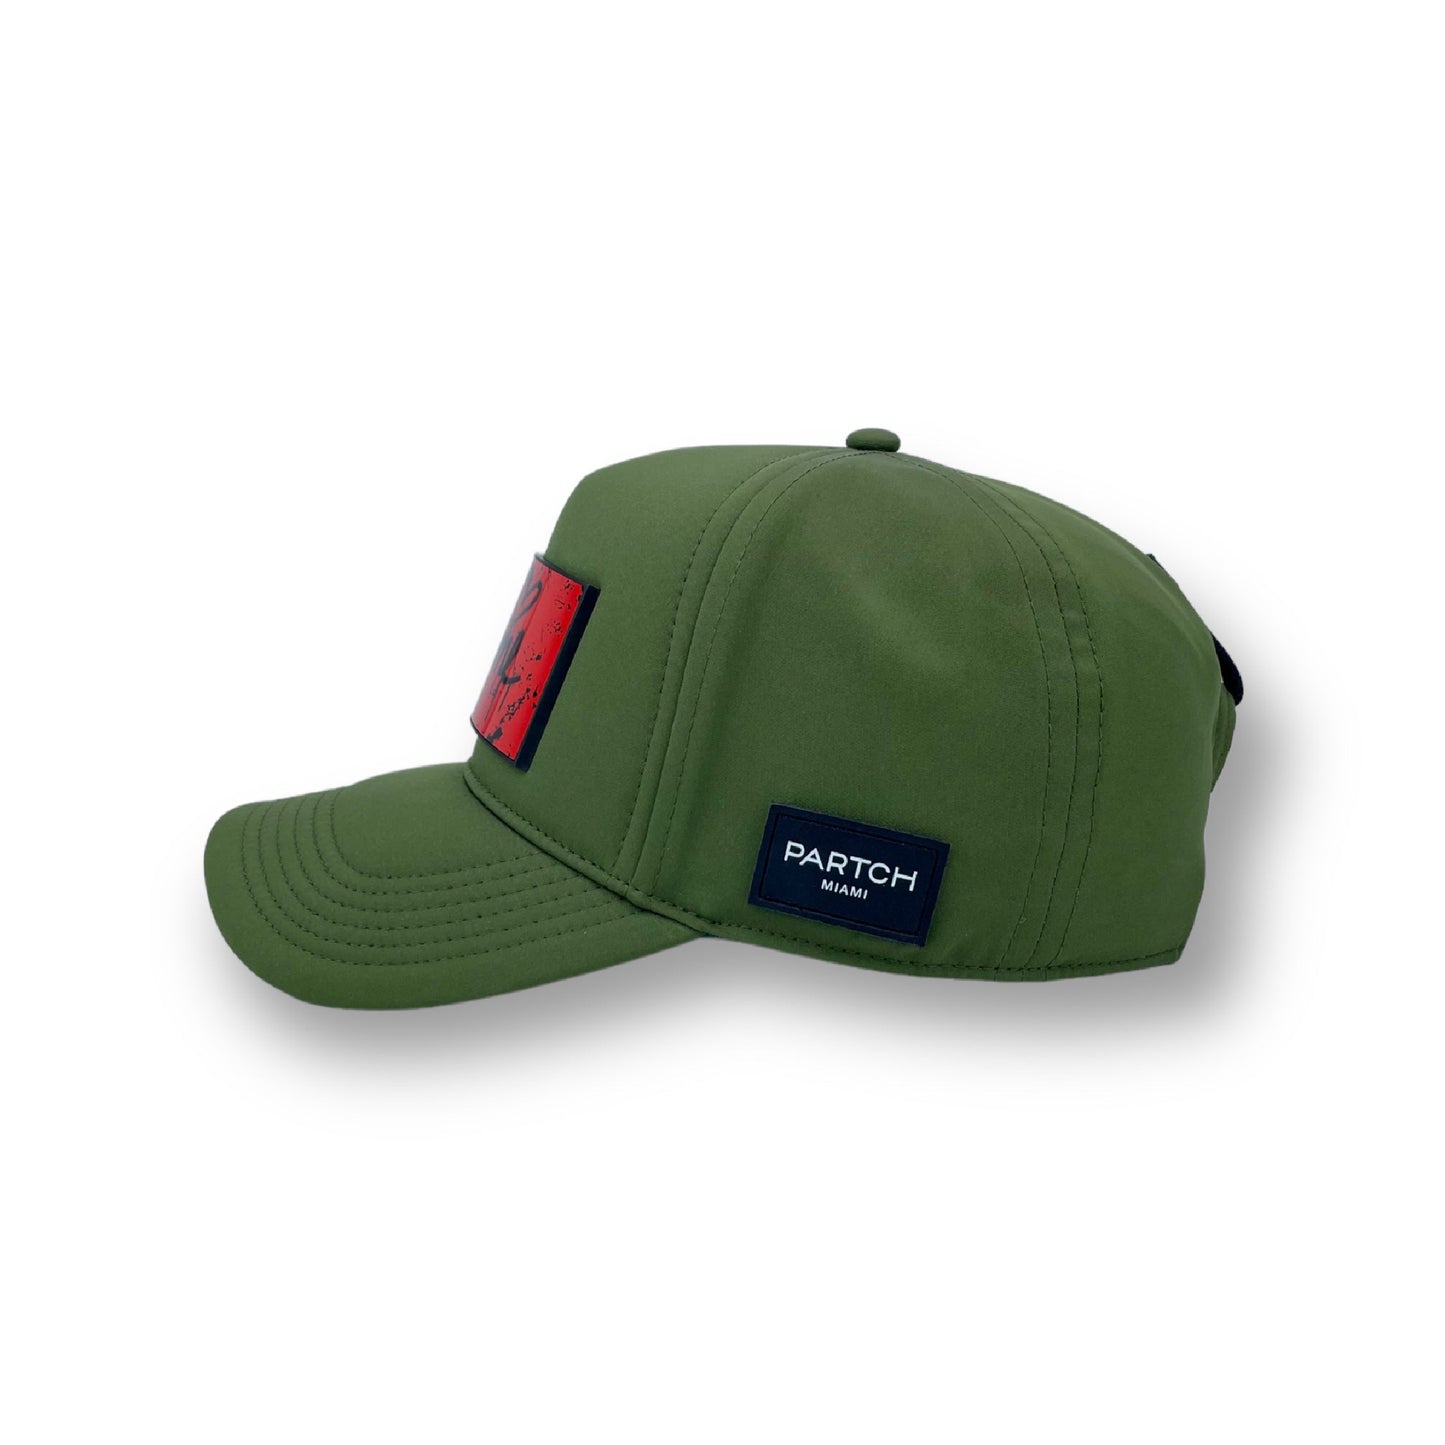 Partch full fabric green trucker hat and je t'aime art PARTCH-clip